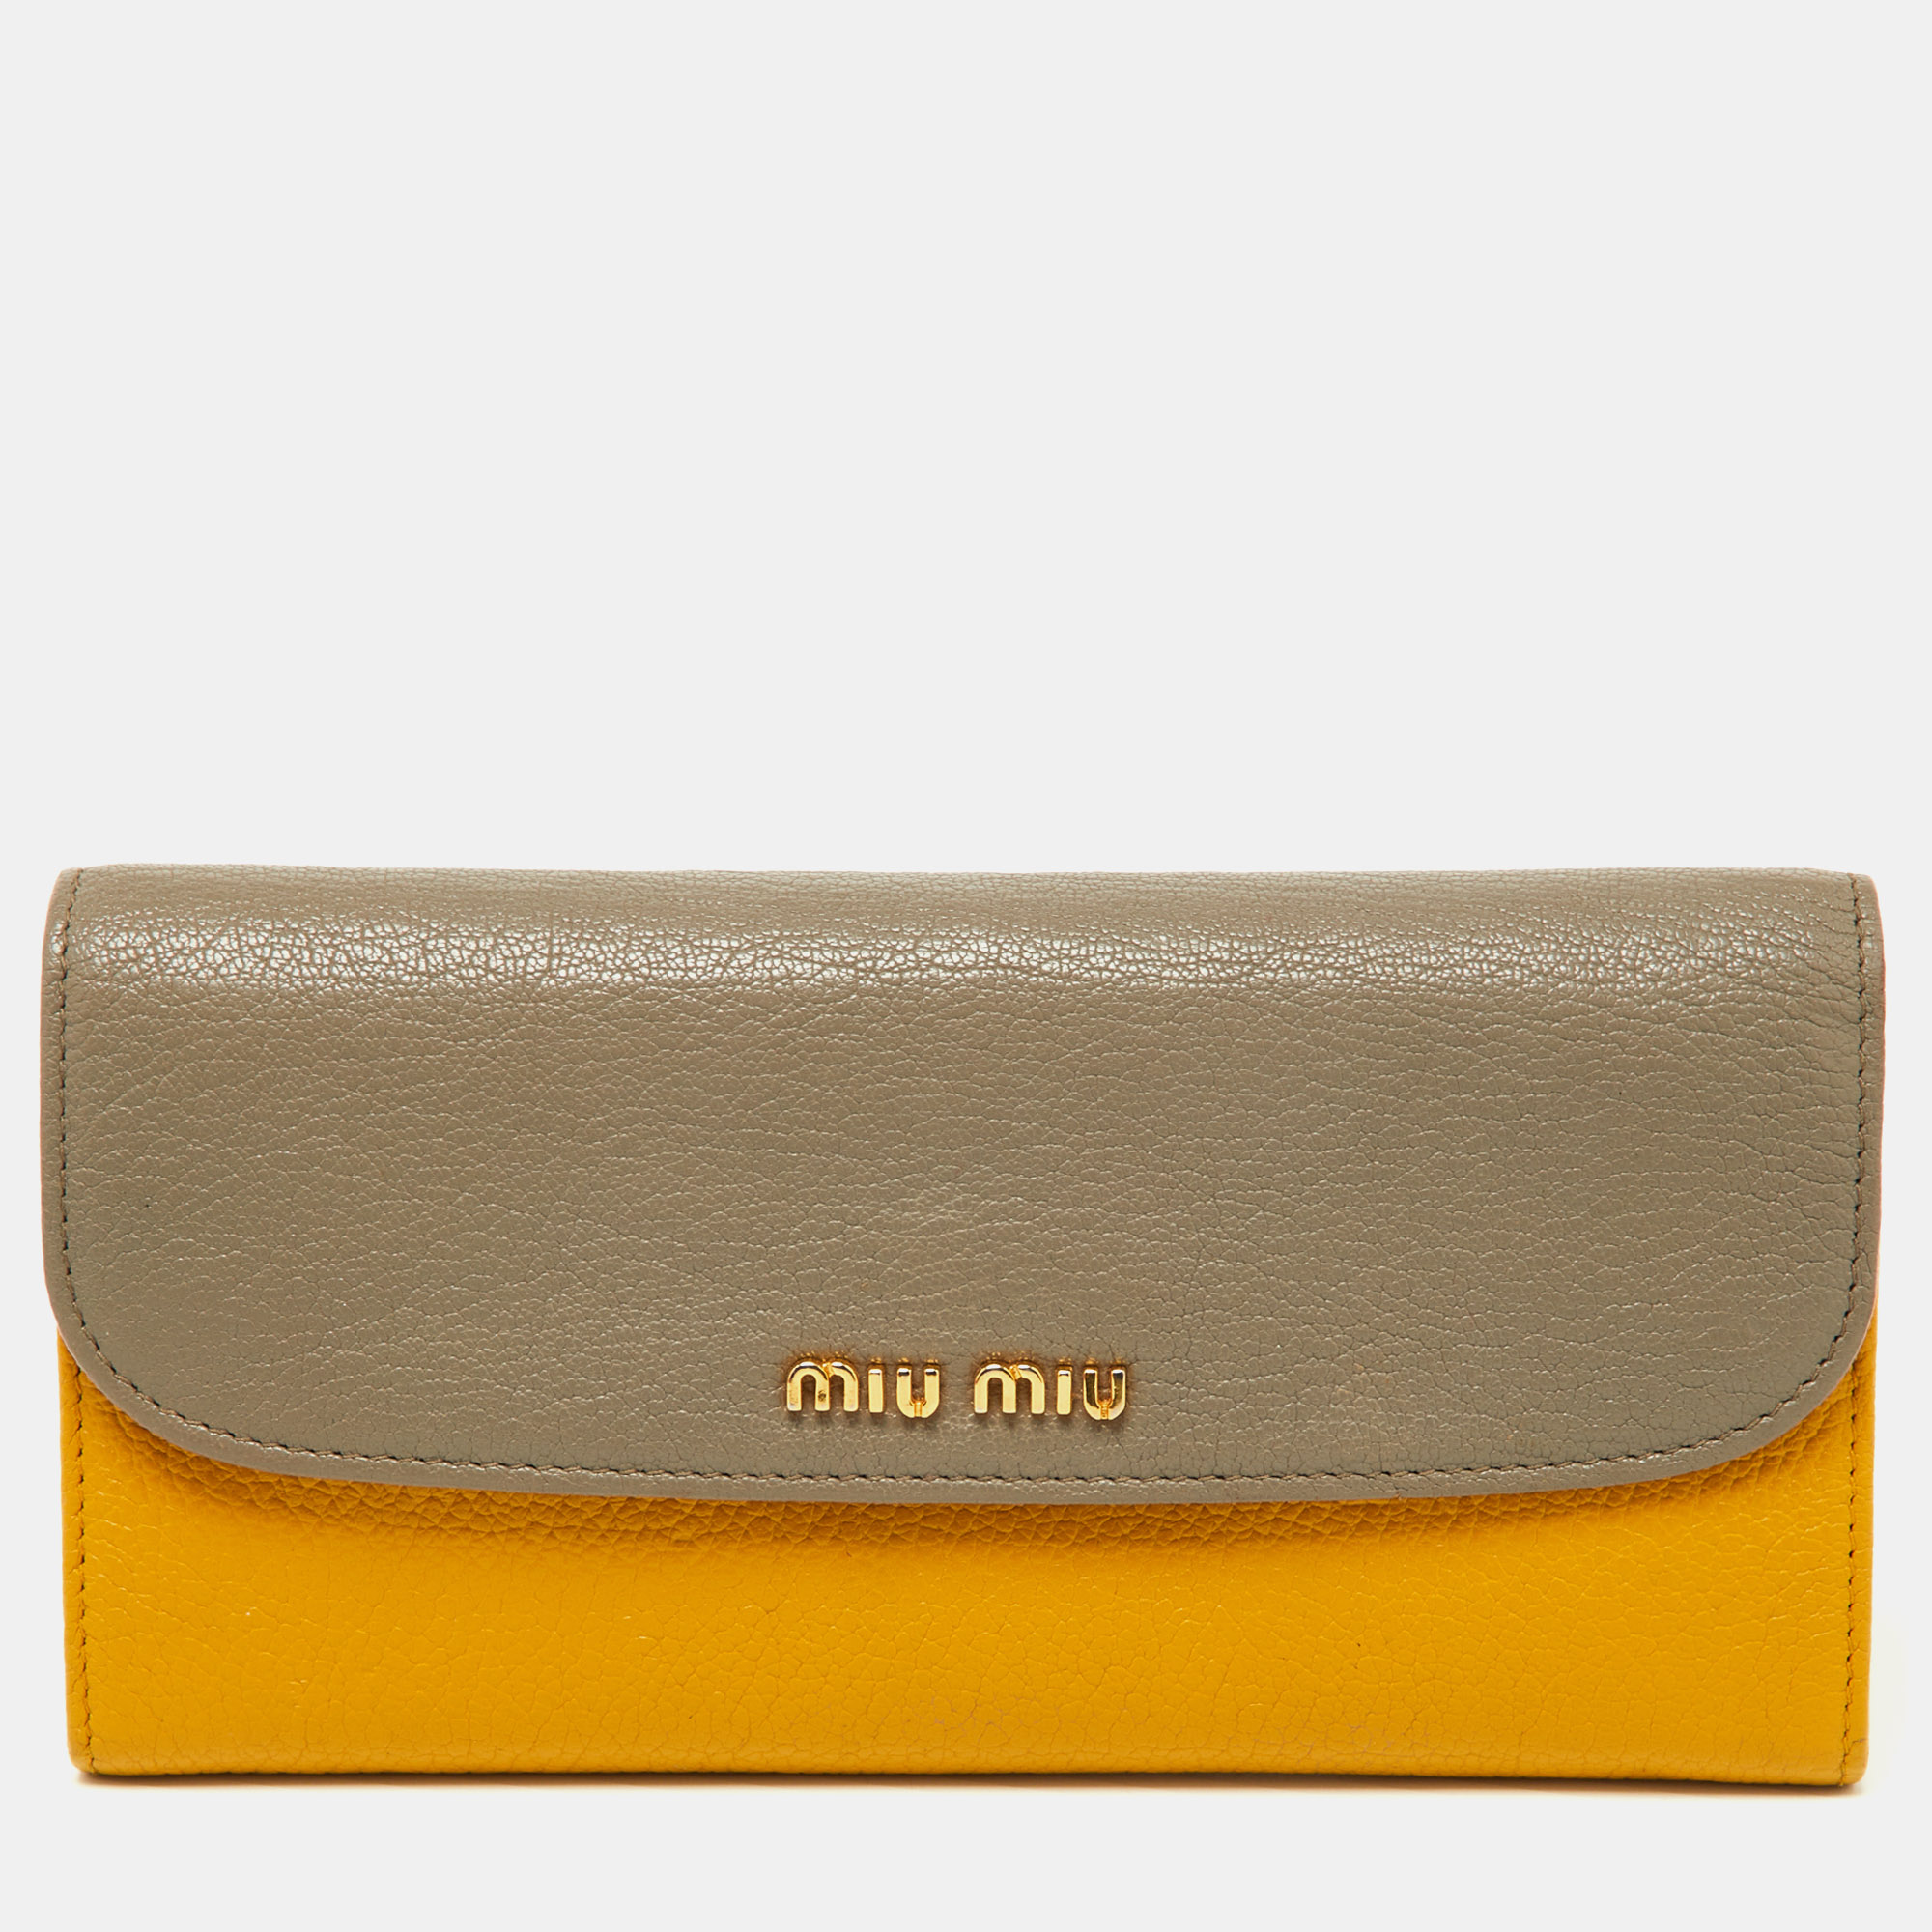 Pre-owned Miu Miu Grey/yellow Madras Leather Flap Continental Wallet